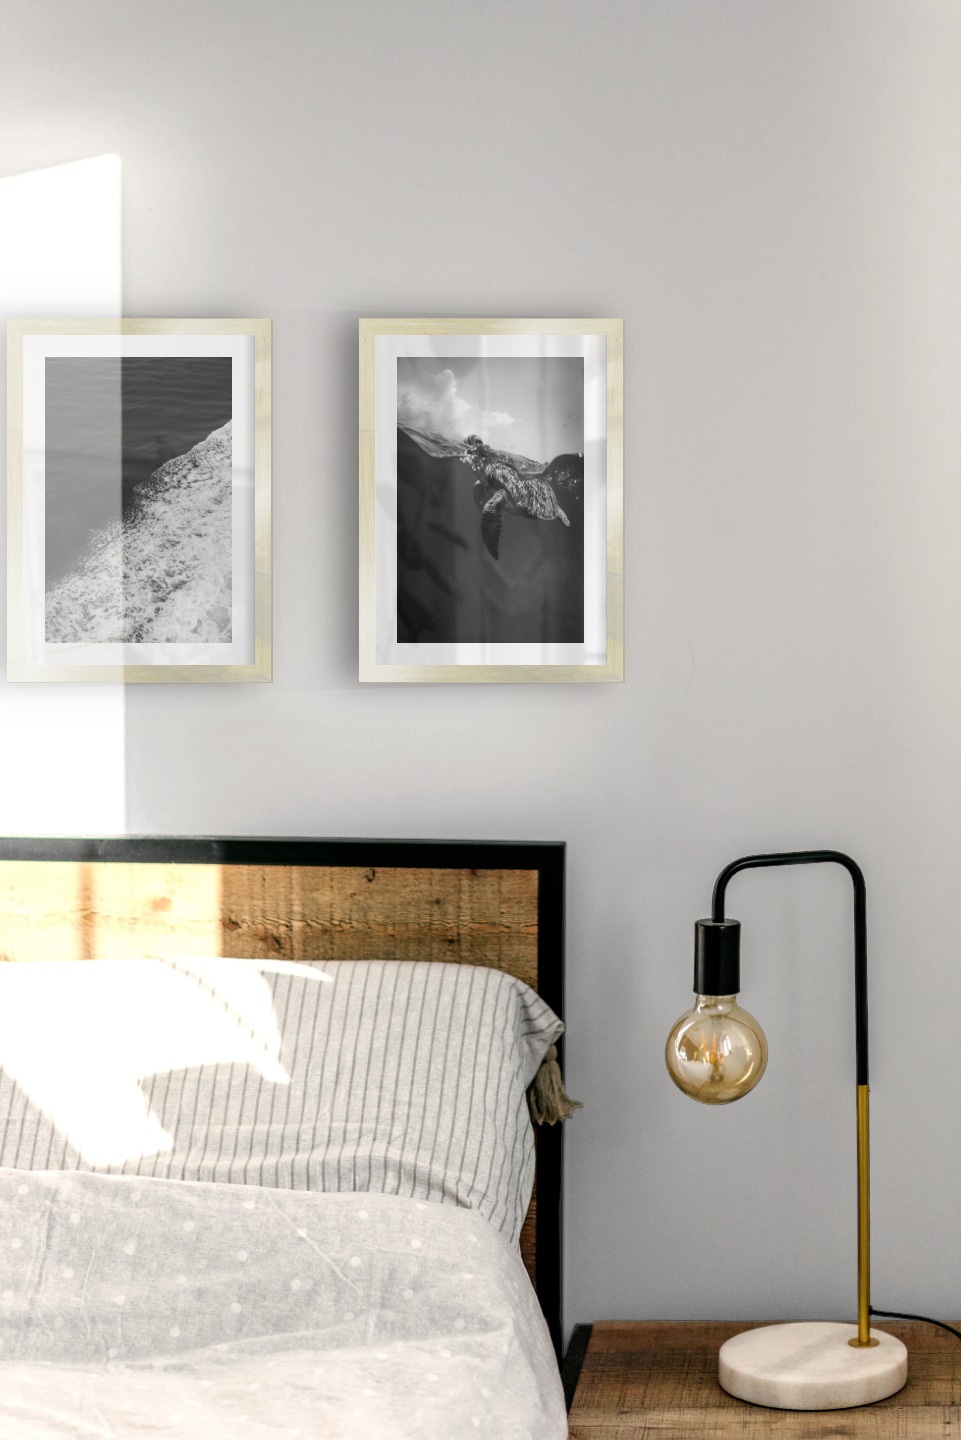 Gallery wall with picture frames in gold in sizes 21x30 with prints "Swell from waves" and "Turtle"